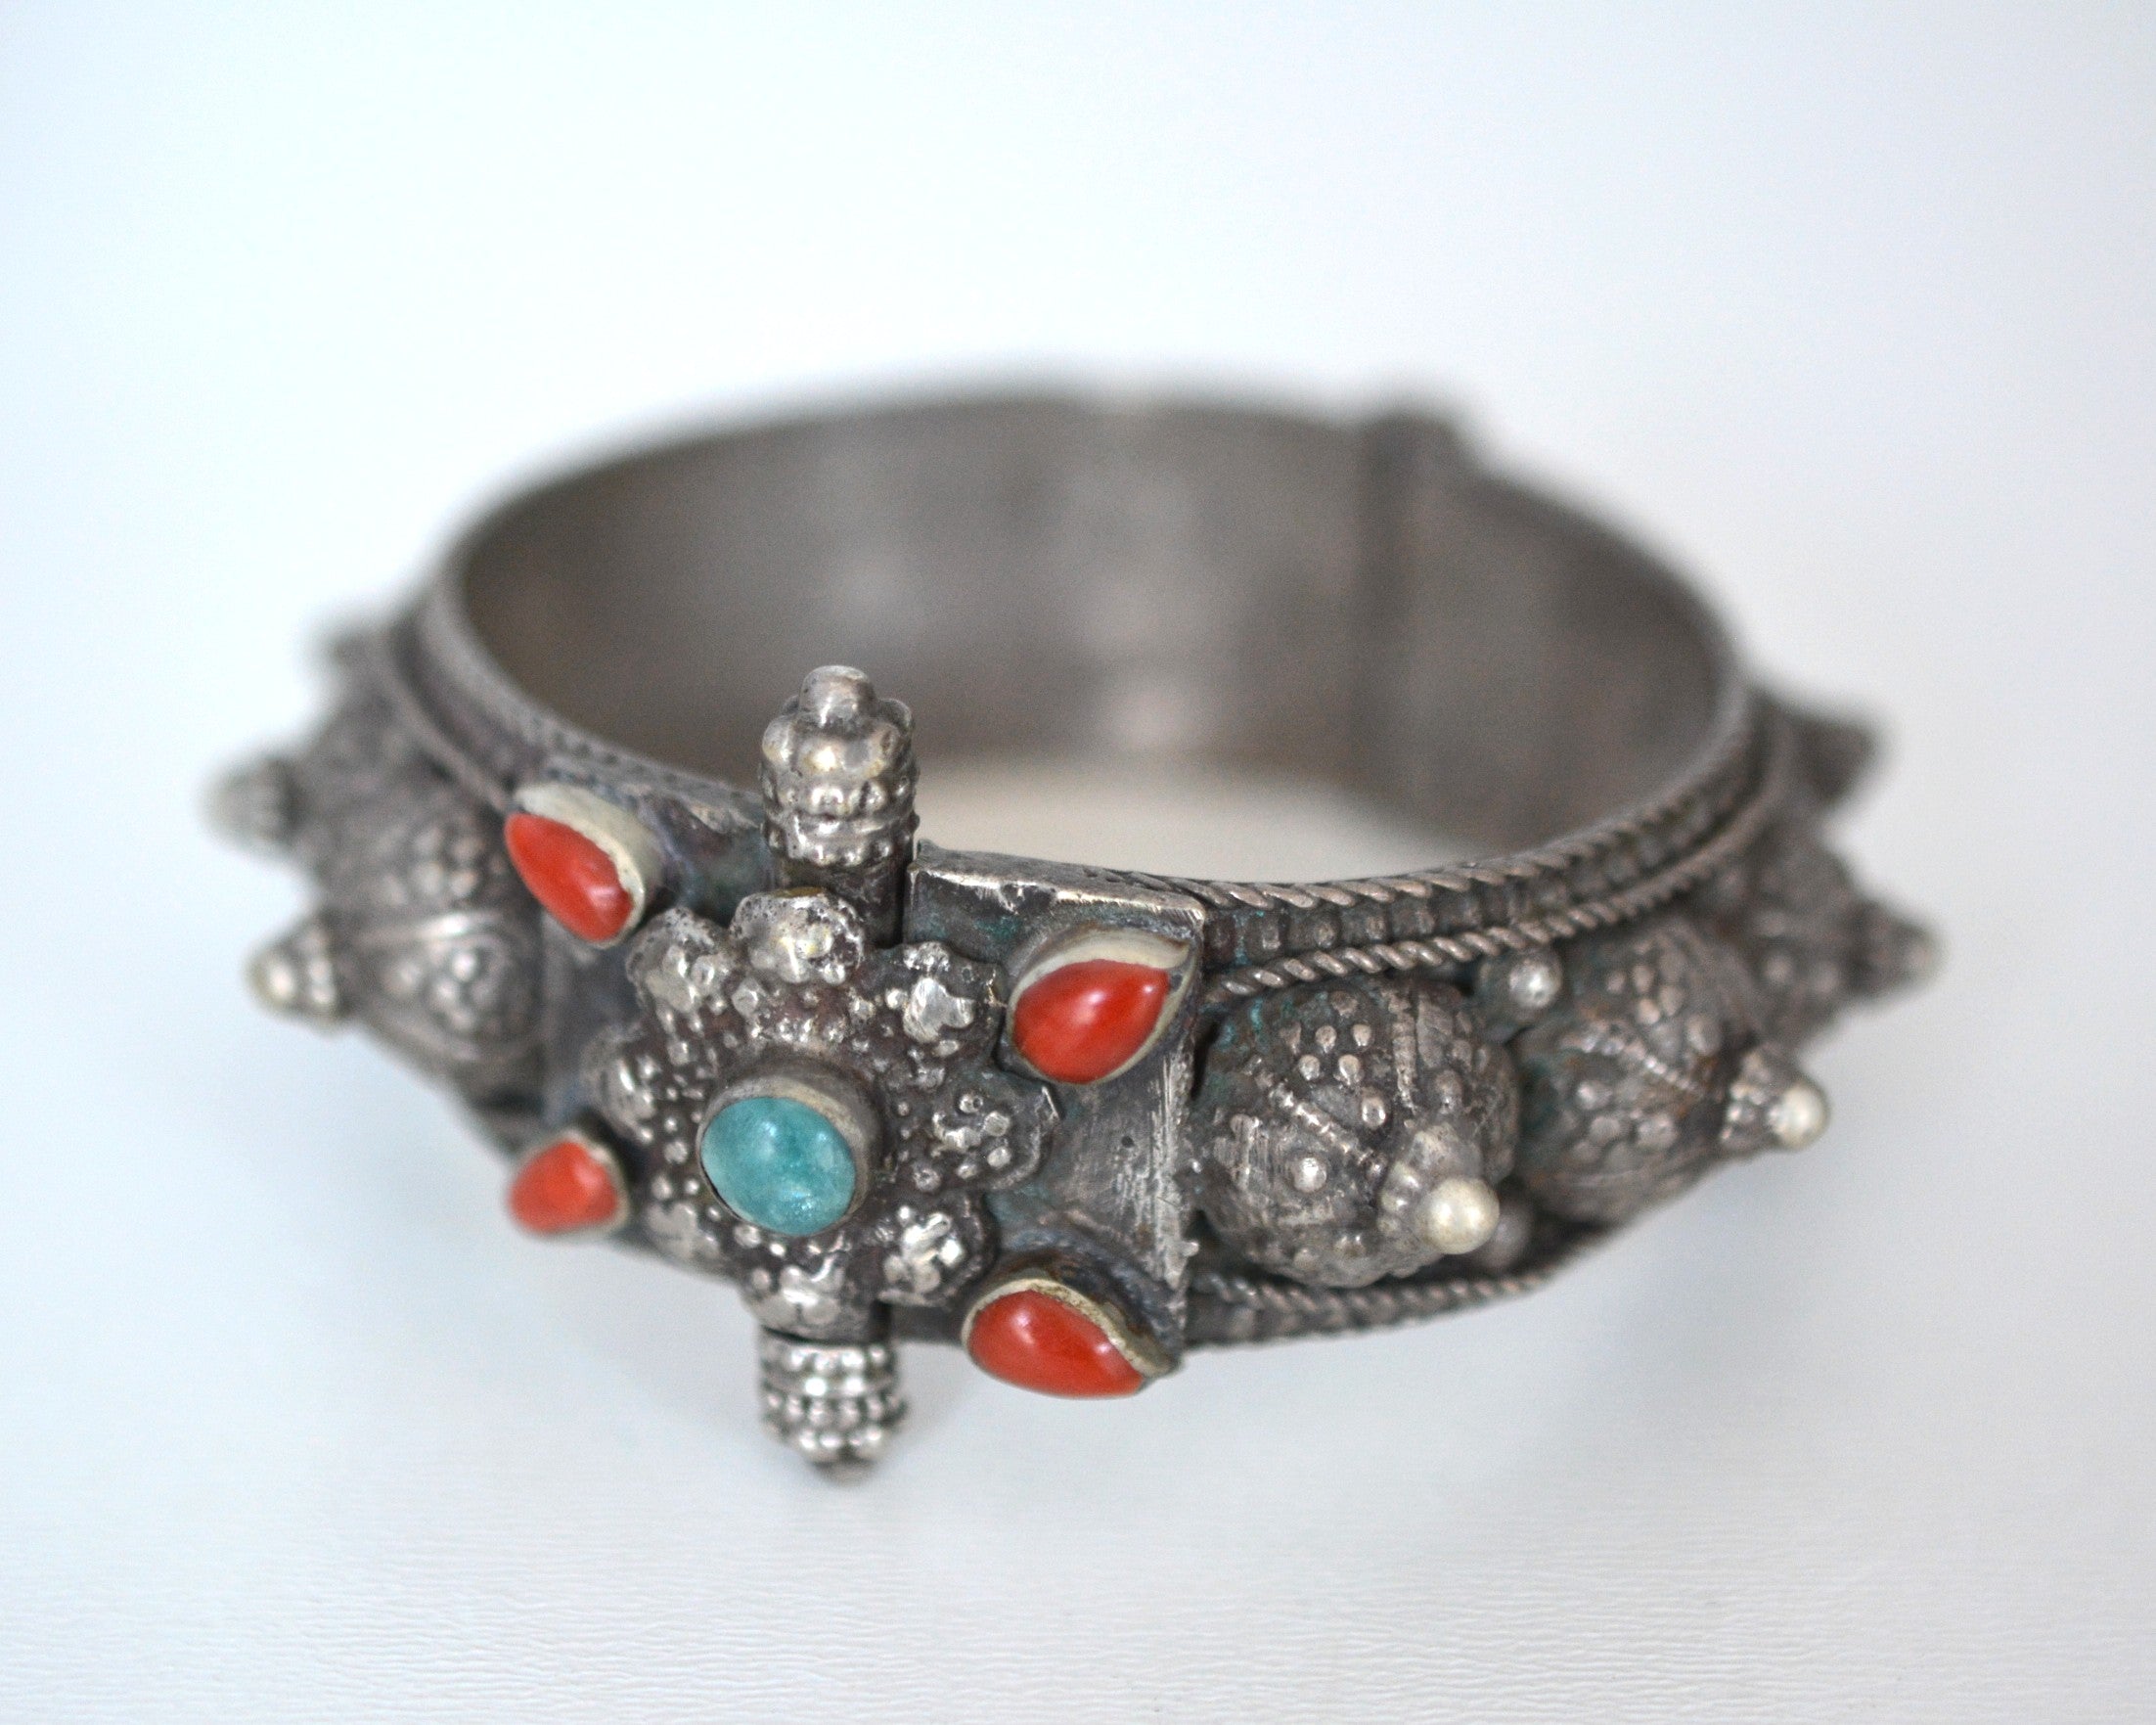 Yemeni Bedouin Silver Bracelet with Coral and Turquoise - Hinged - Small Size